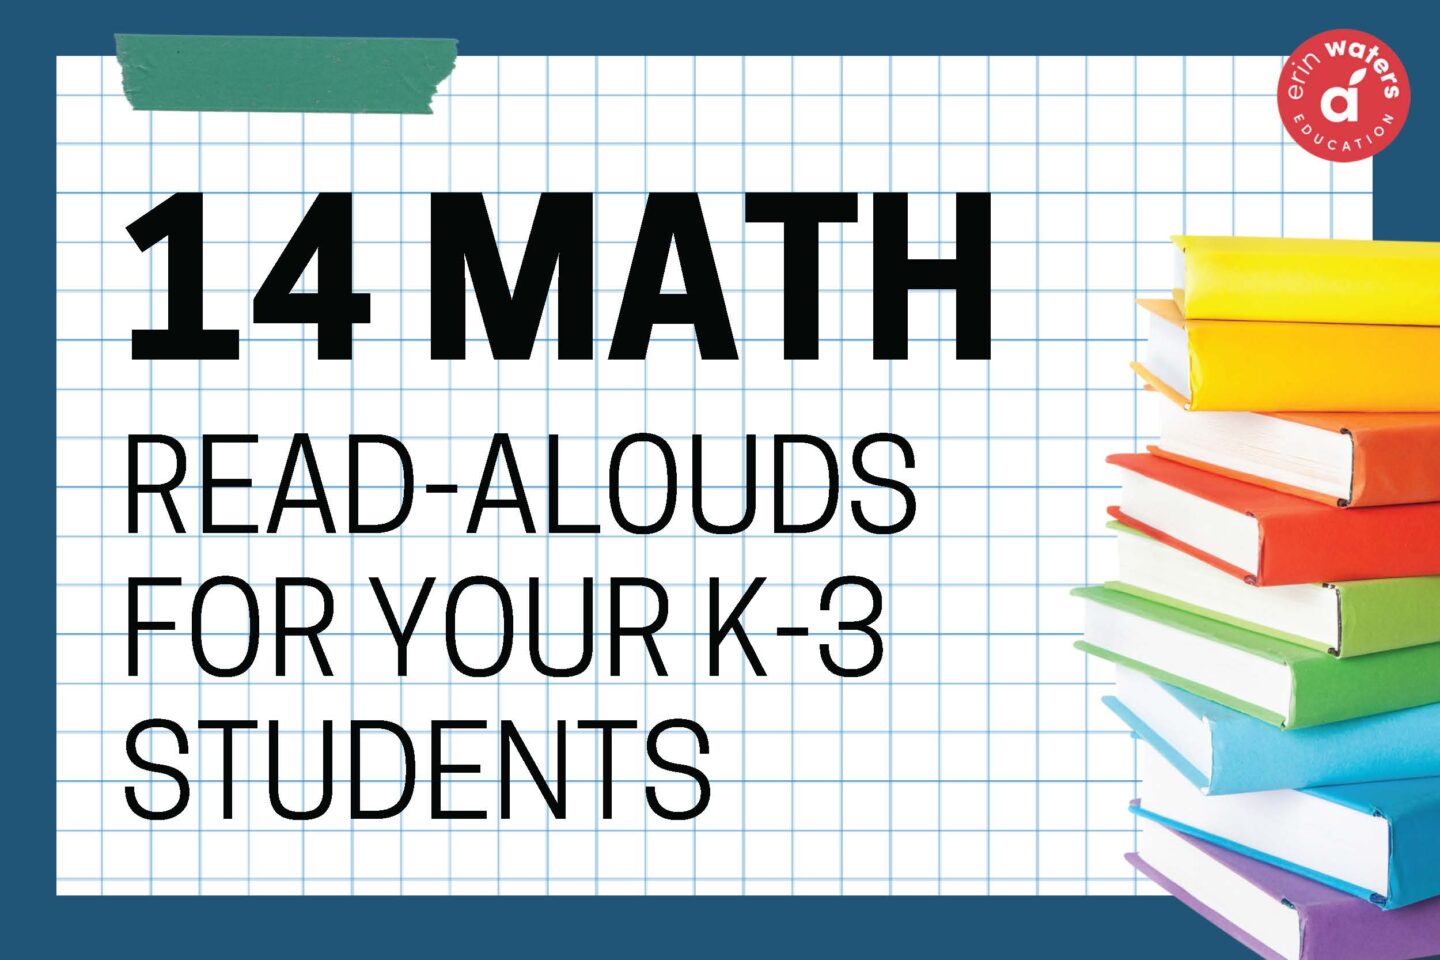 math read alouds cover image. A stack of rainbow color books on the right side.